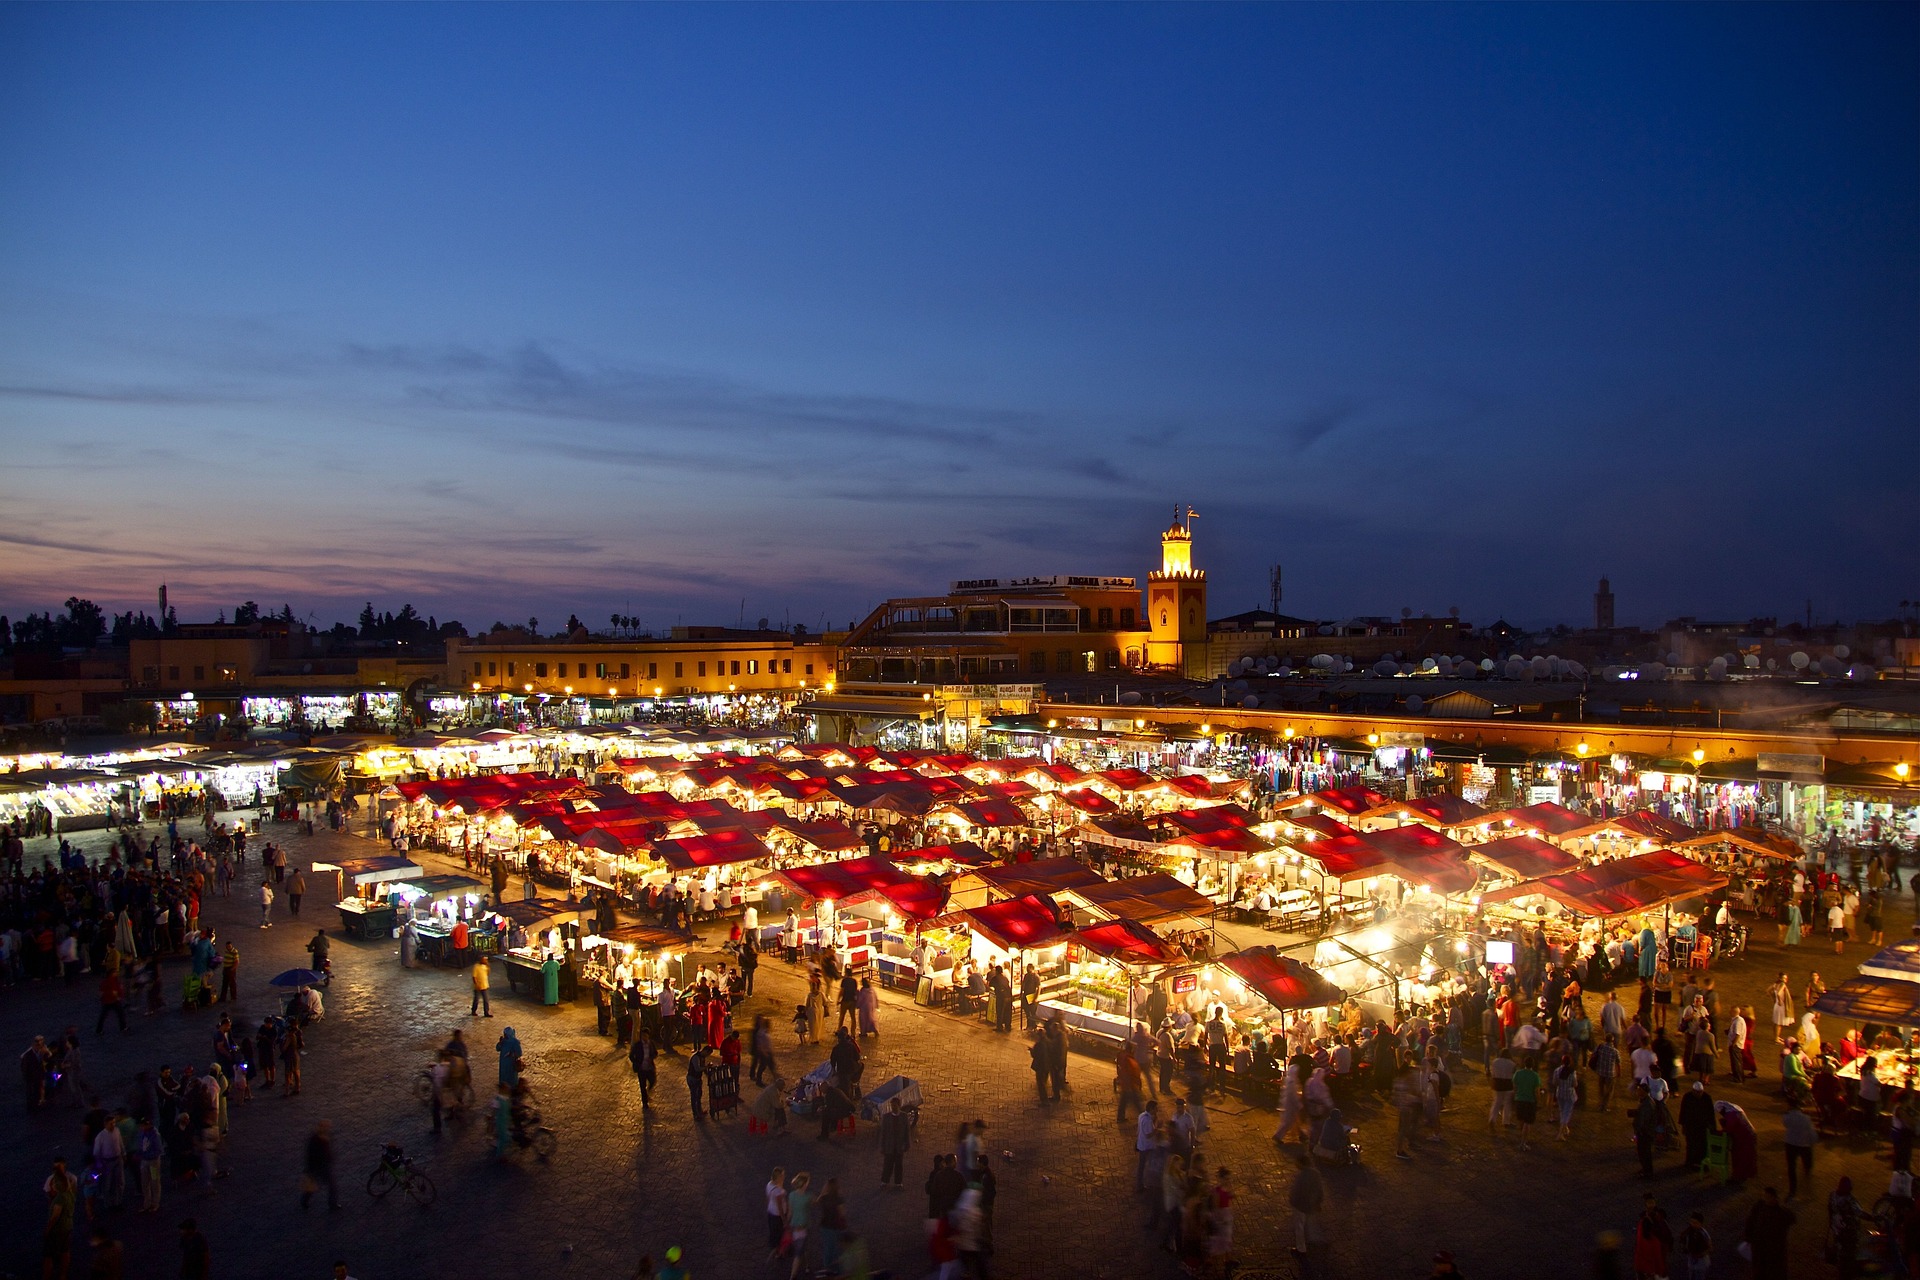 The Innumerable Benefits of Tourism in Marrakech